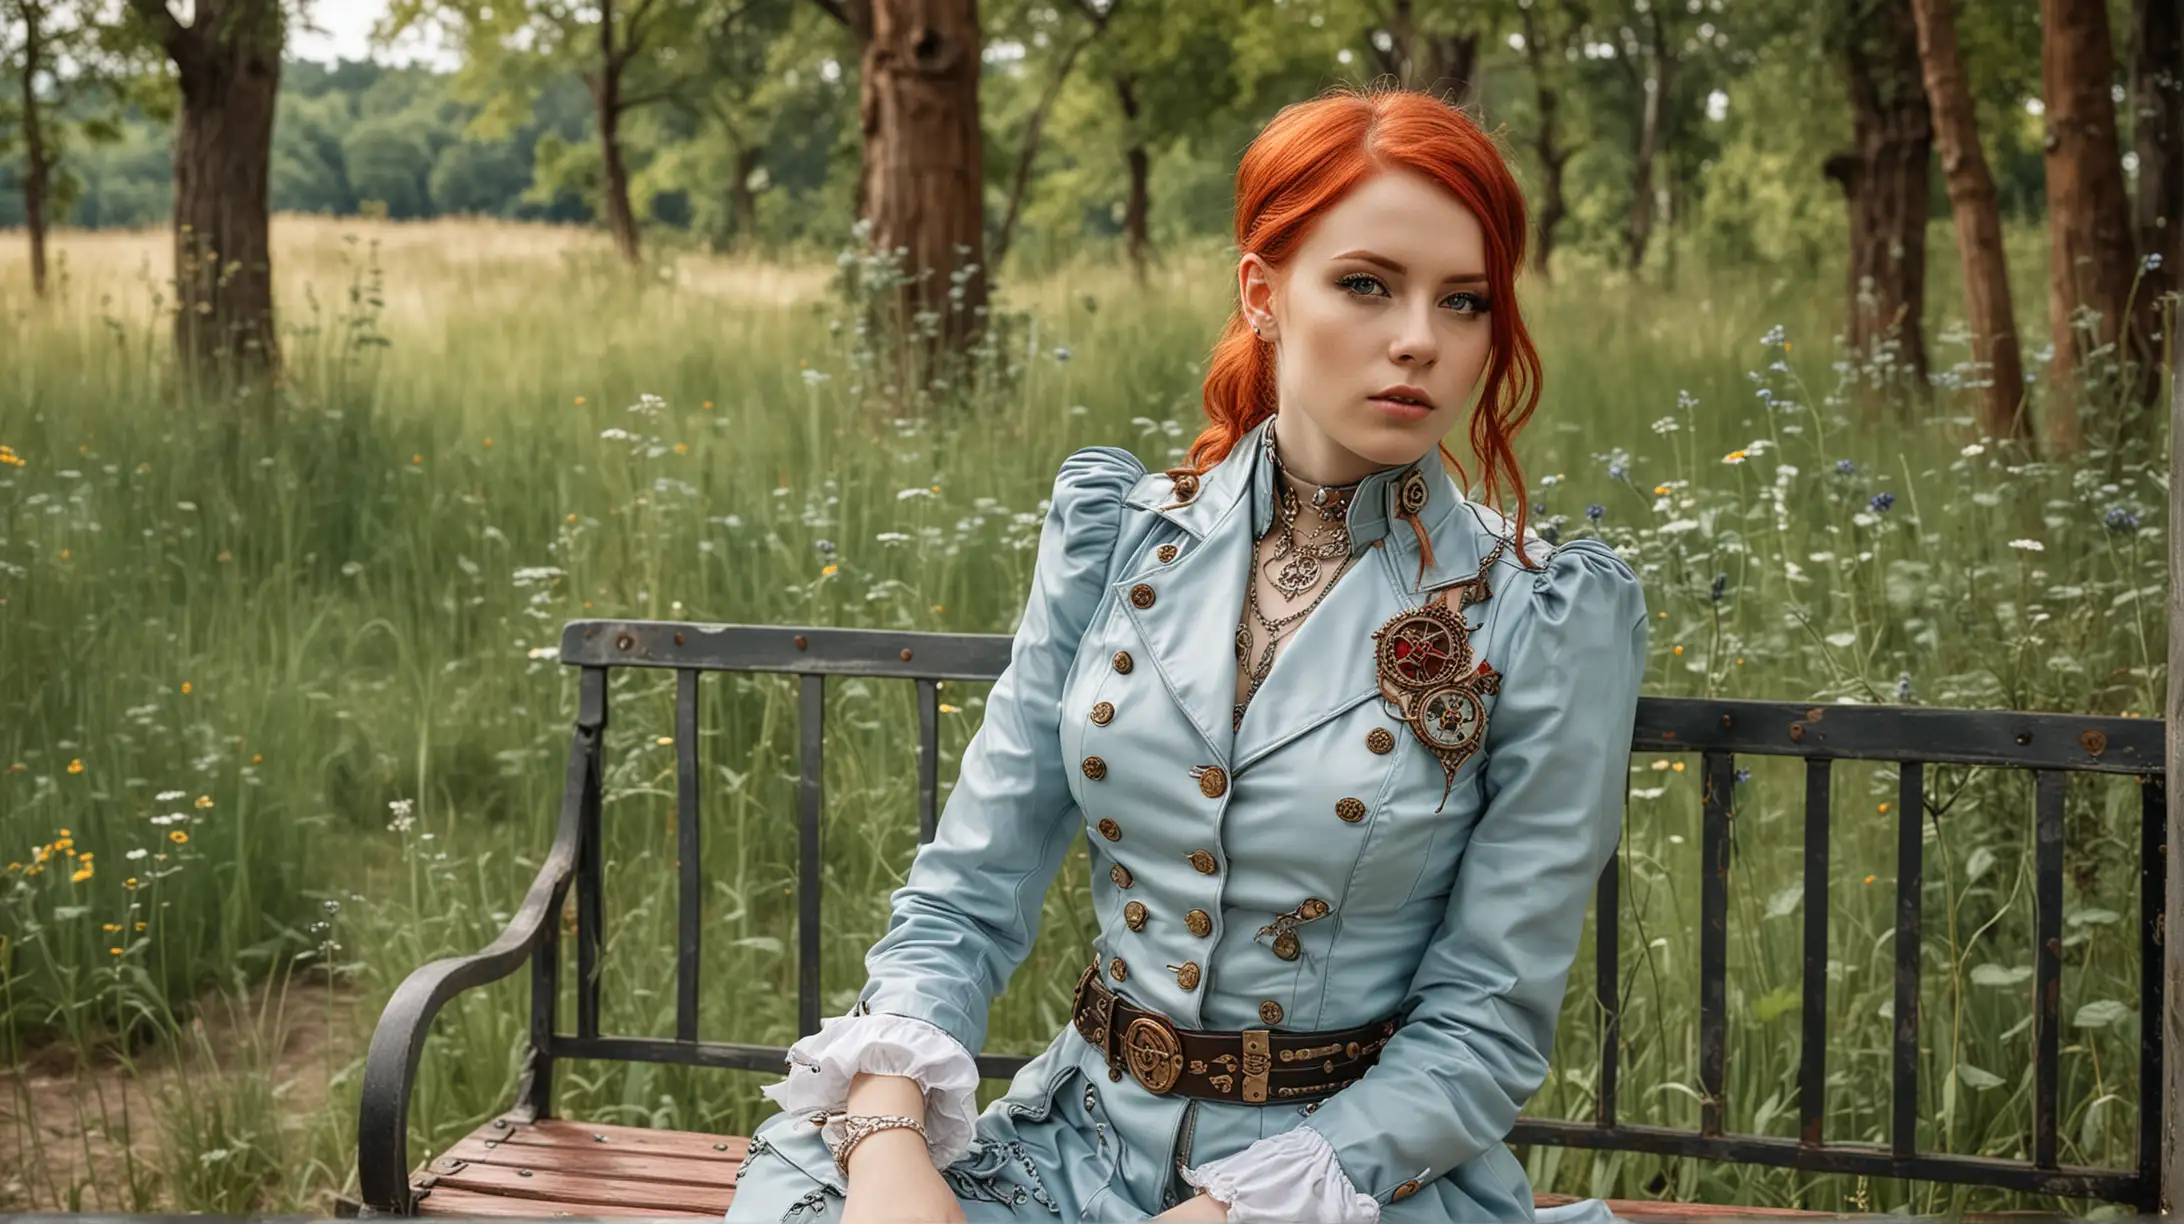 a young steampunk woman in a light blue leather uniform, with red hair and delicate steampunk jewelry sits on a bench in a wild park, sunny, some white clouds